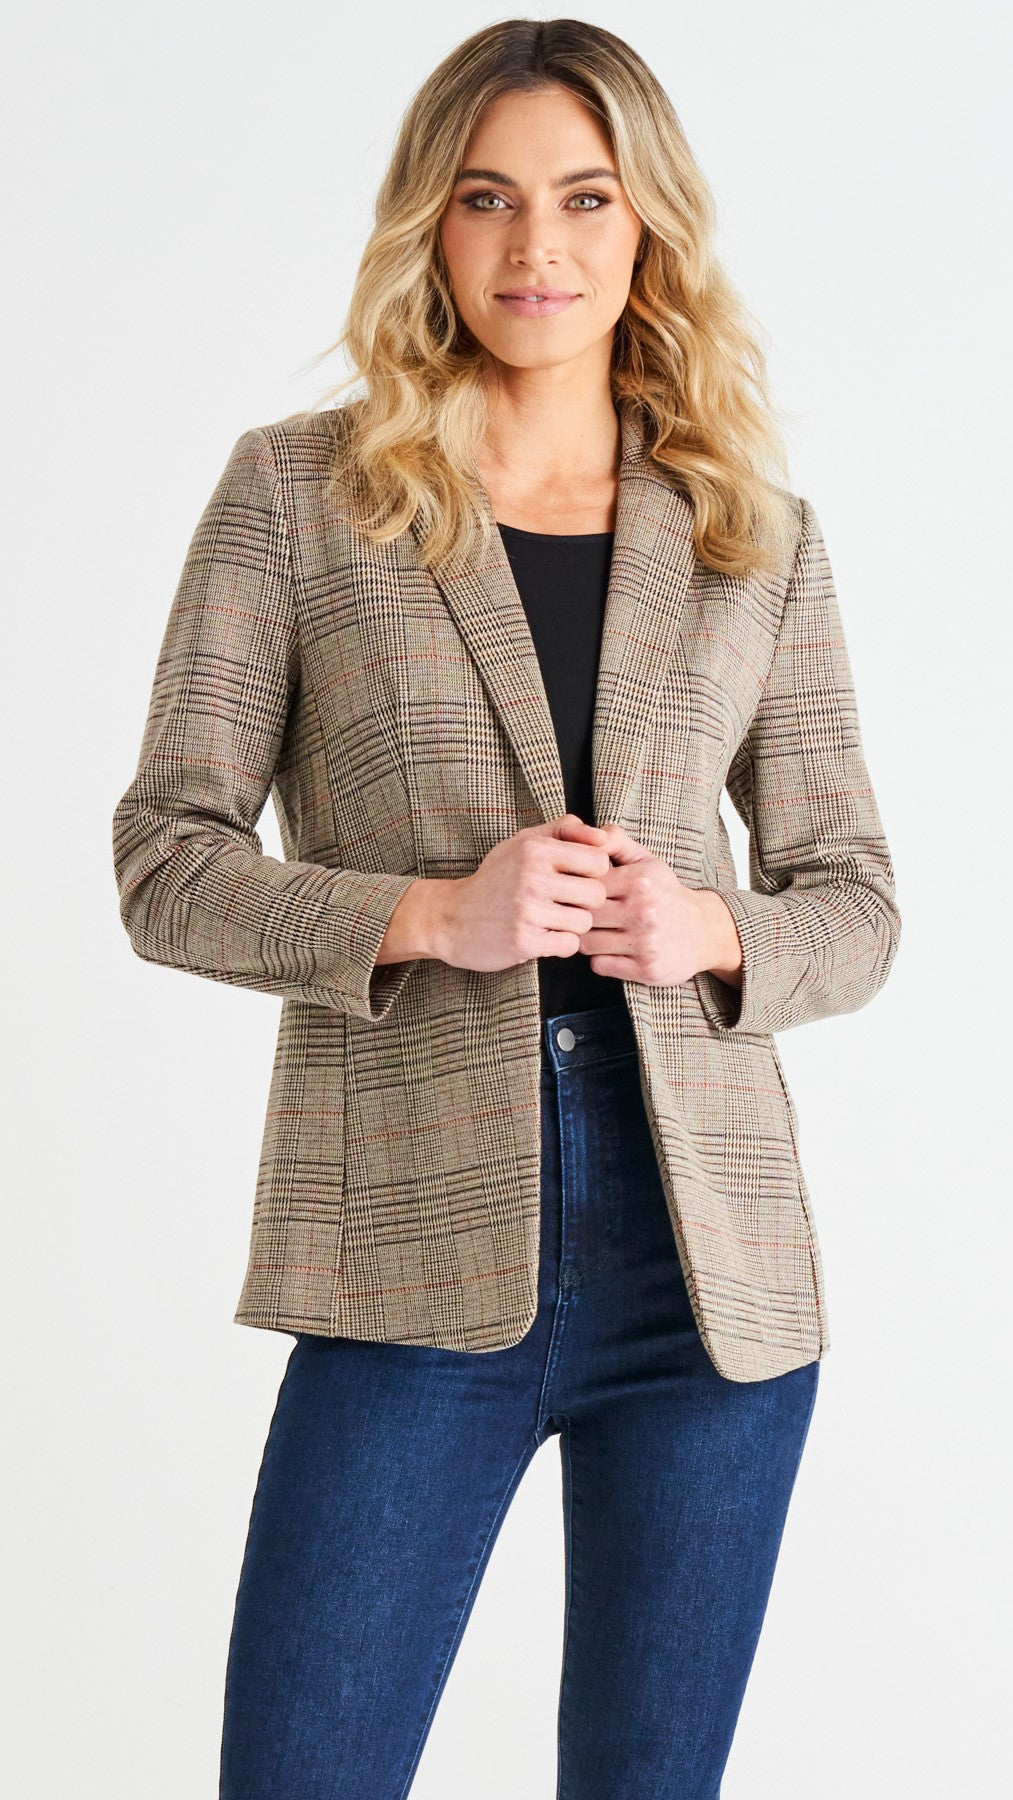 **NEW** Portsea Stretch Blazer: It doesn't get more classic than this versatile layering piece. We call it the Goldilocks of blazers: not too big, not too small and structured enough to wear over a - Ciao Bella Dresses - Betty Basics